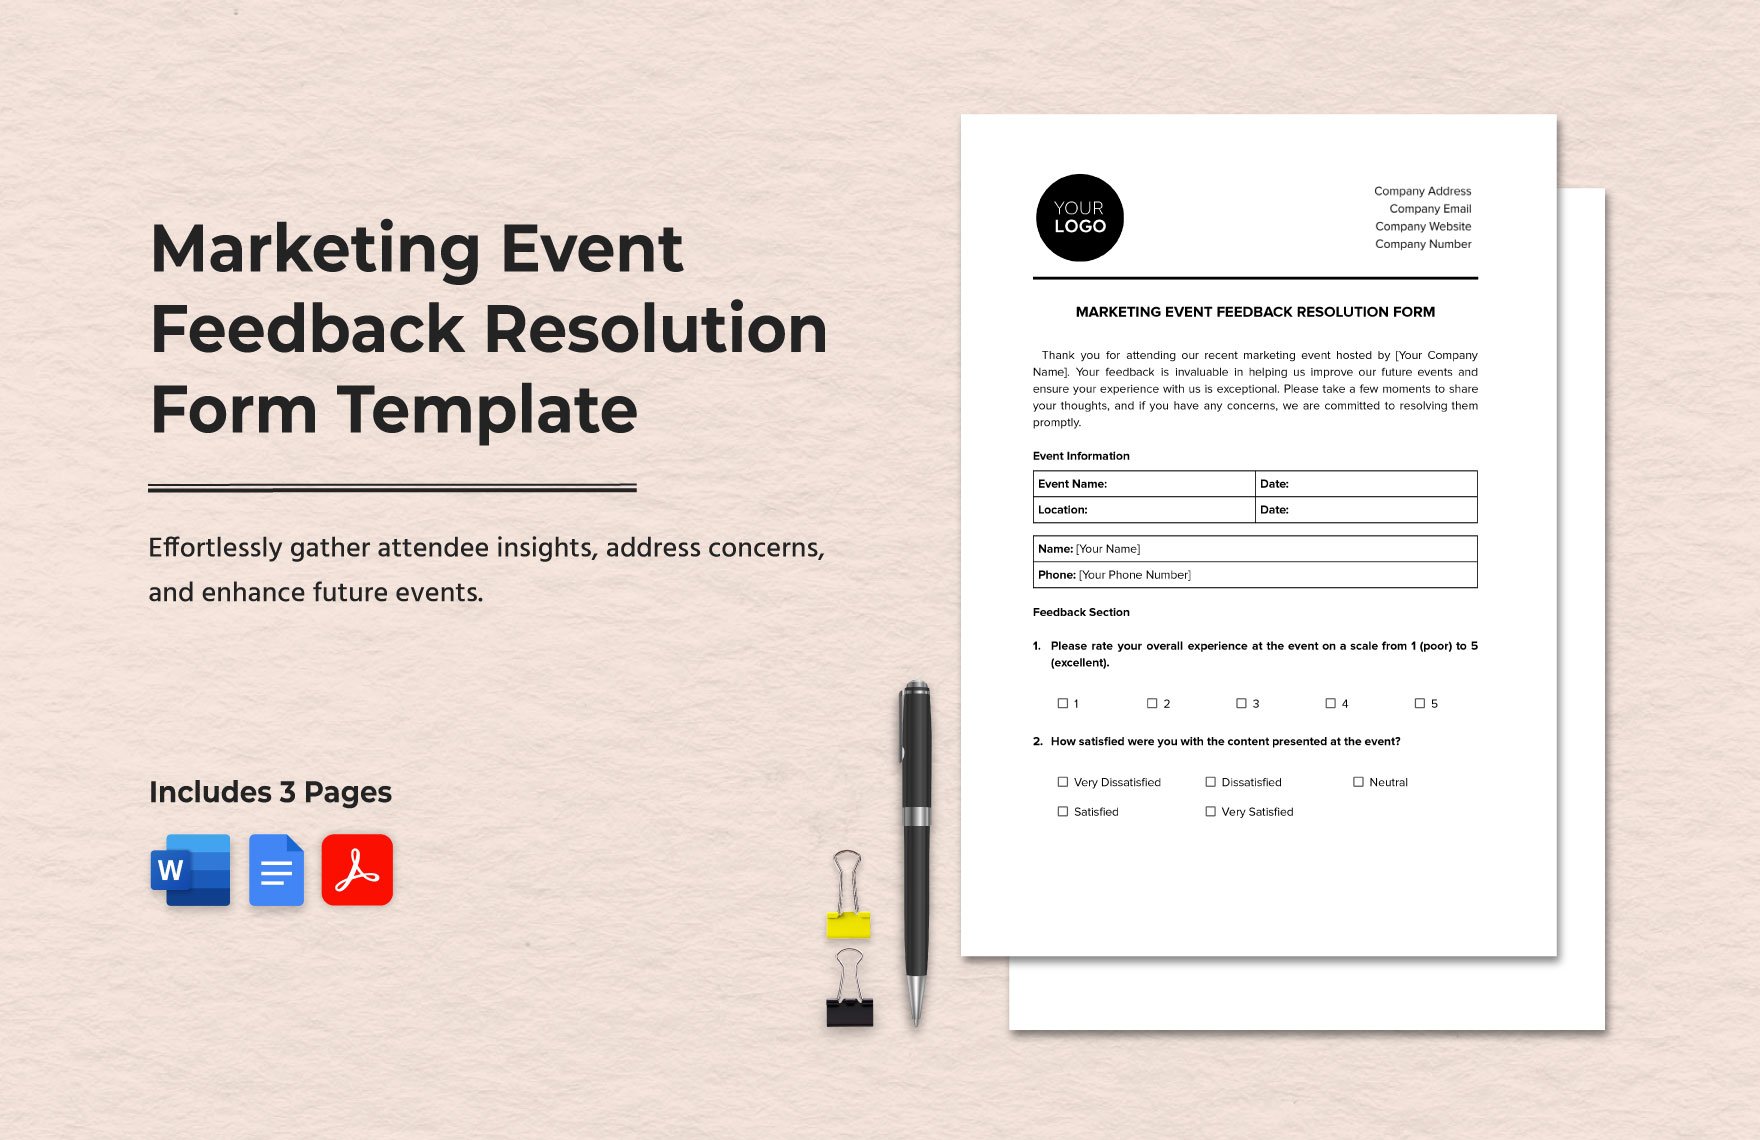 Marketing Event Feedback Resolution Form Template in Word, Google Docs, PDF